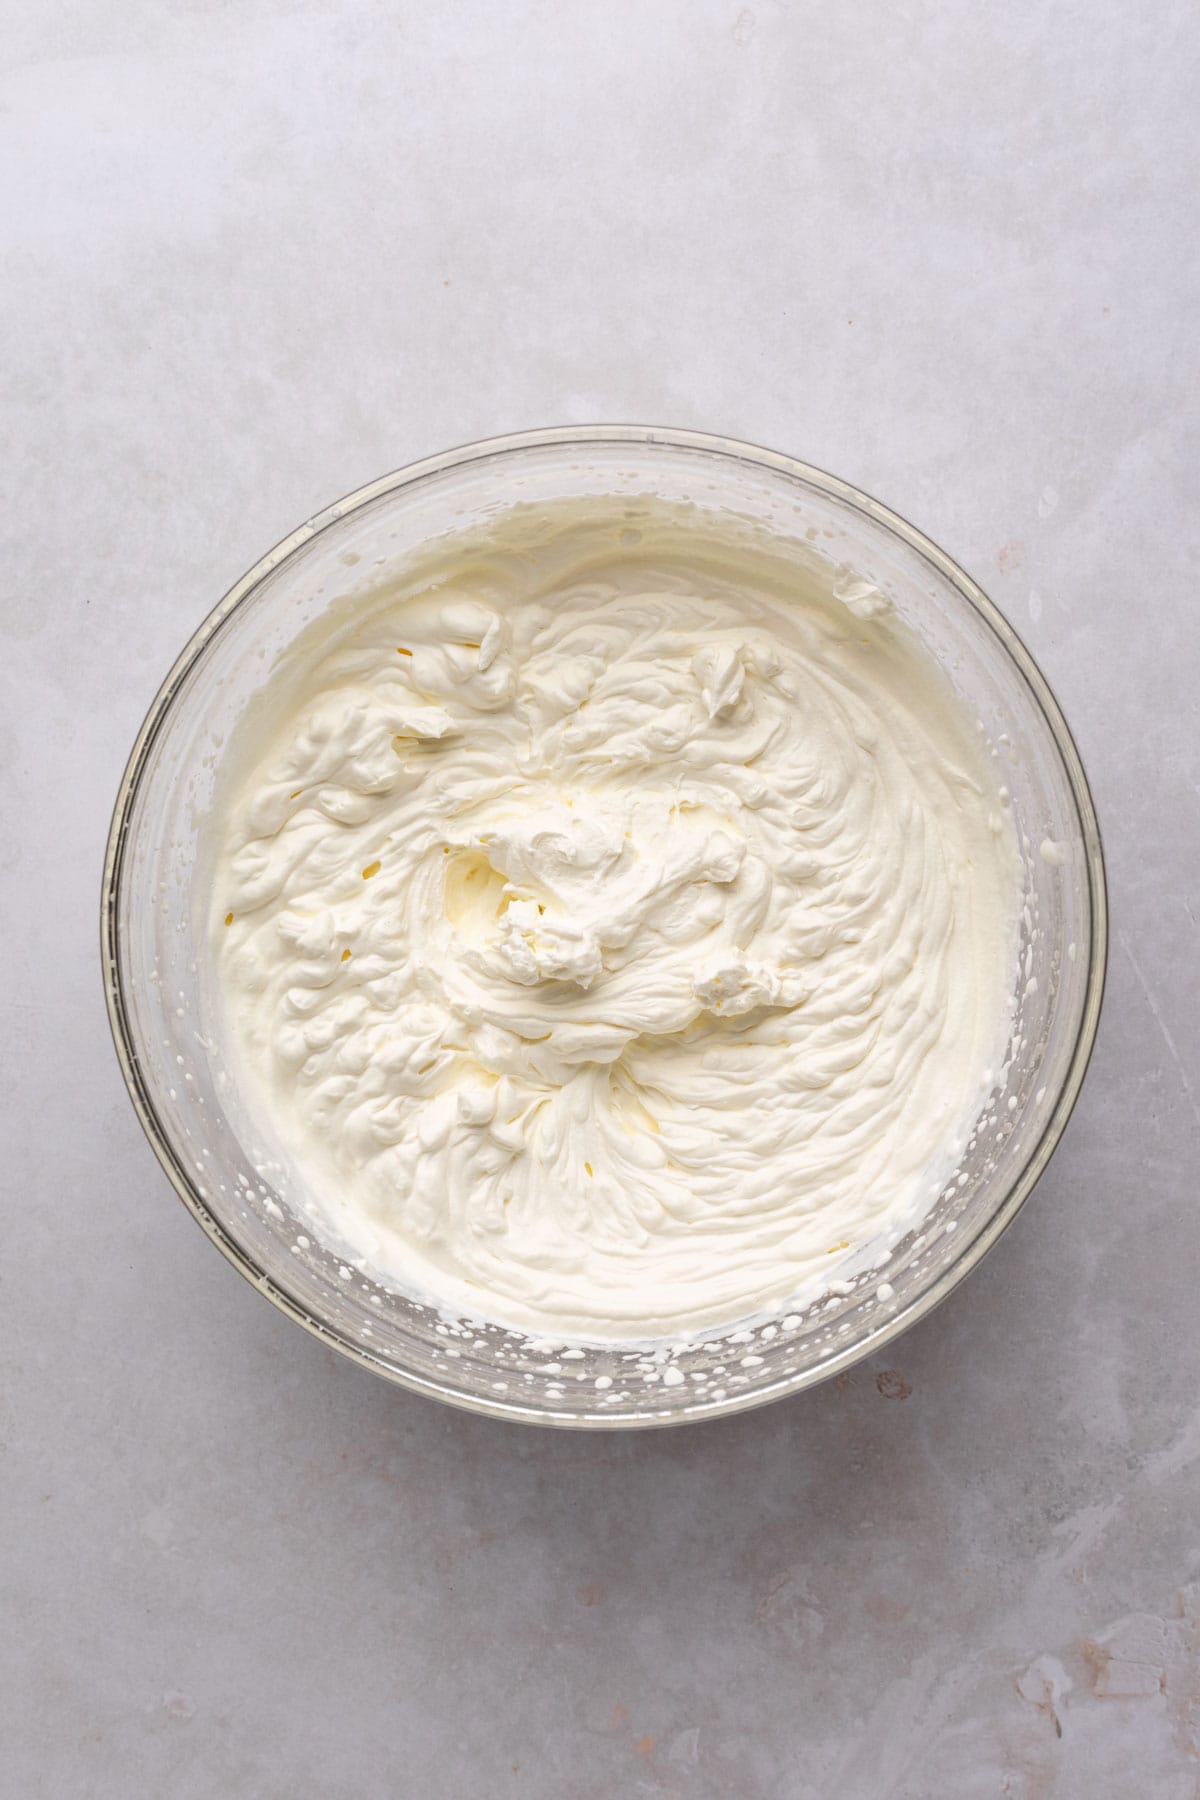 Heavy cream whisked to stiff peaks in a glass bowl on a flat surface.